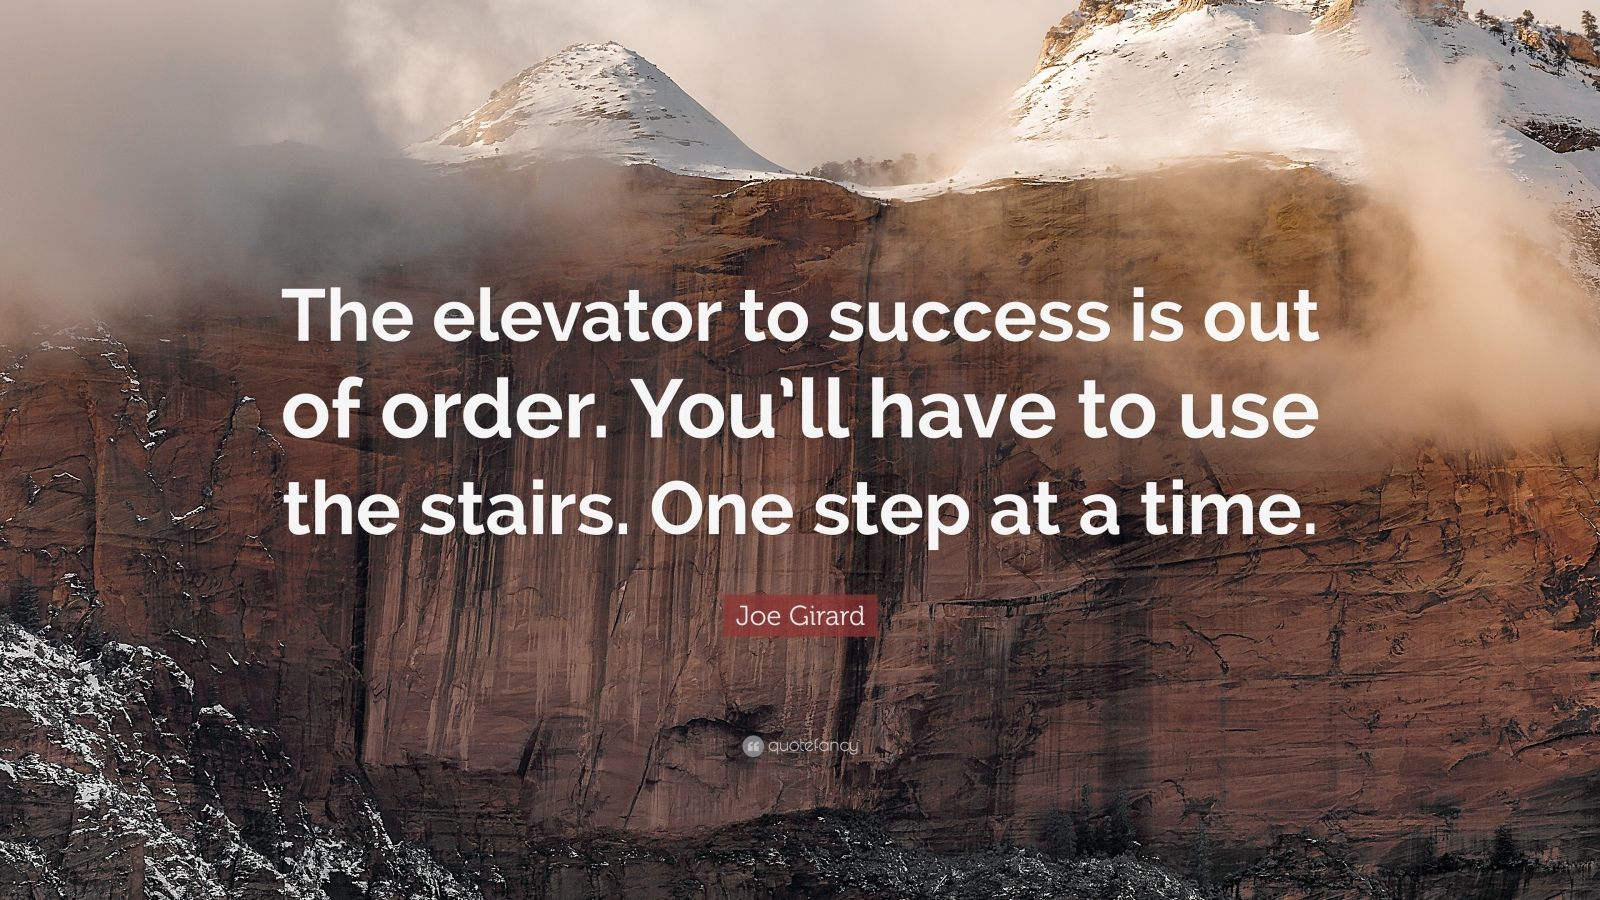 1708580 Joe Girard Quote The elevator to success is out of order You ll